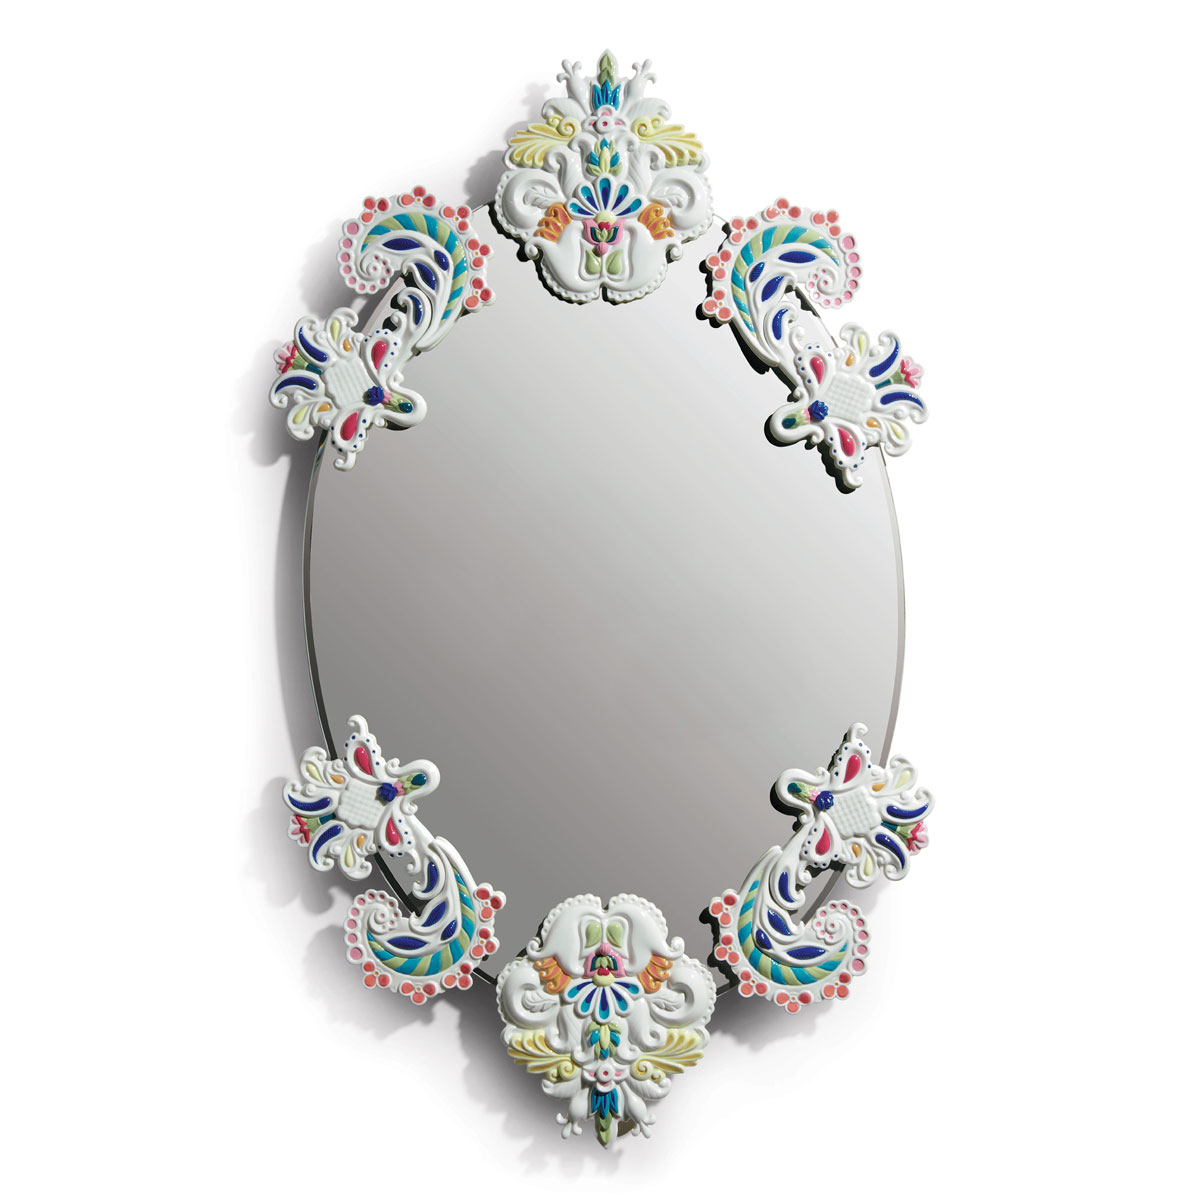 Lladro Home Accessories, Oval Wall Mirror Without Frame. Multicolor. Limited Edition